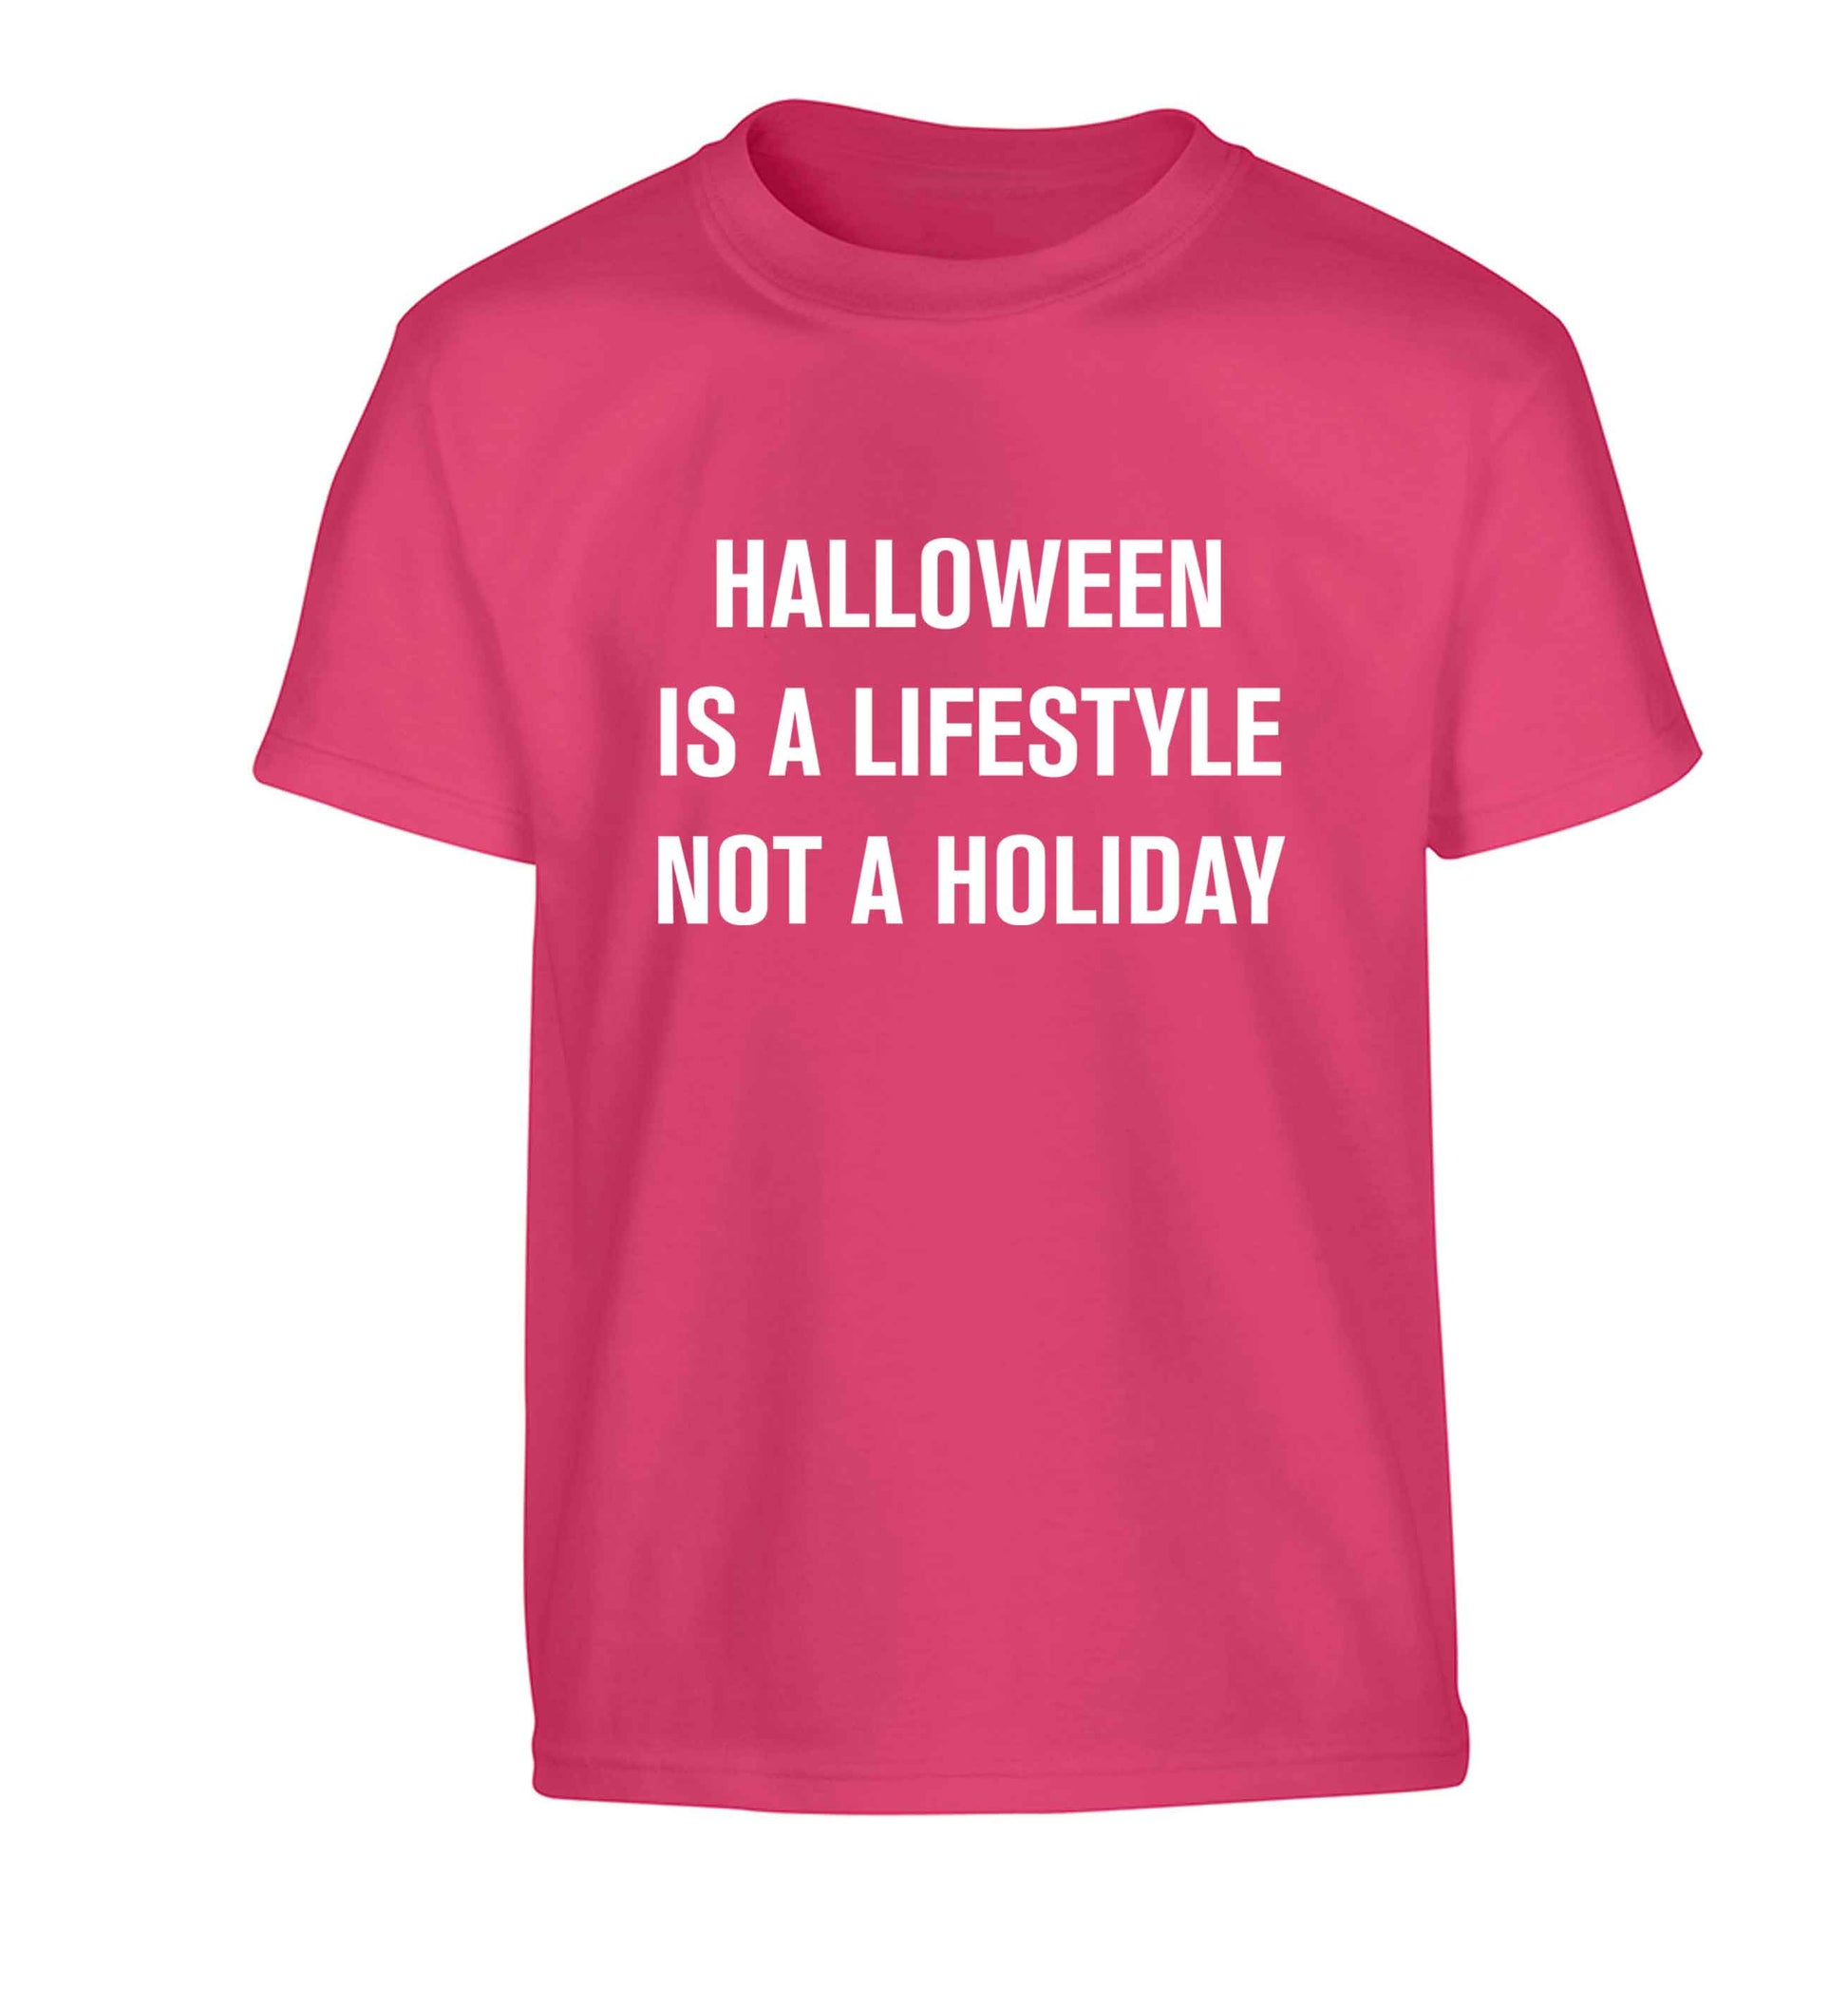 Halloween is a lifestyle not a holiday Children's pink Tshirt 12-13 Years